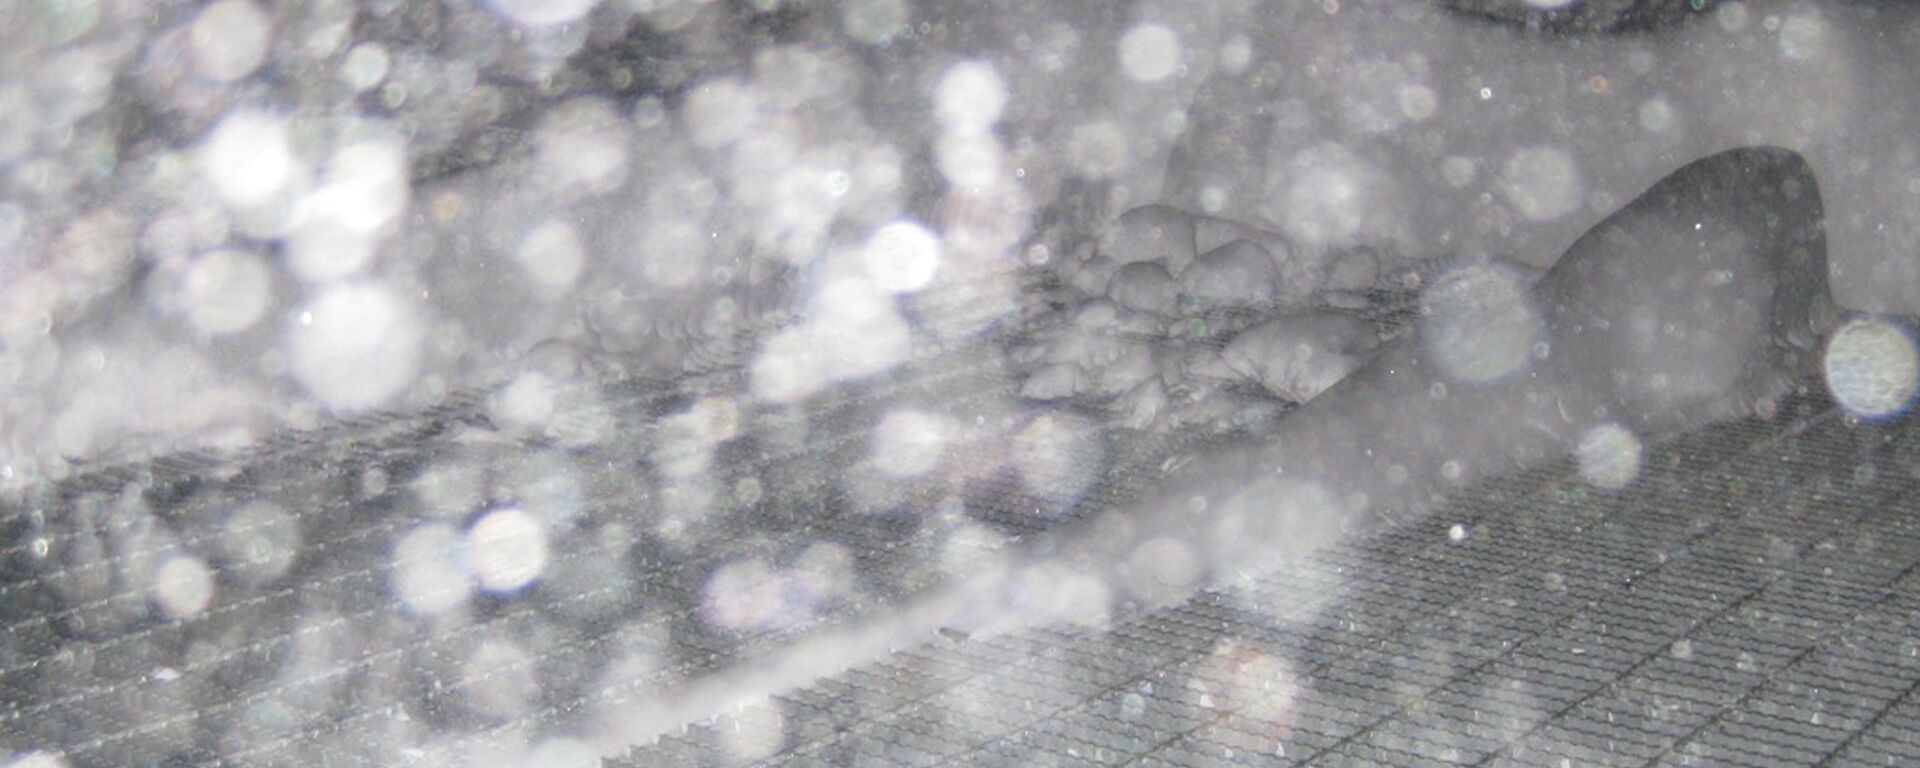 Attempt to capture the minimal visibility in a blizzard with the front door of the Living Quarters only two metres away